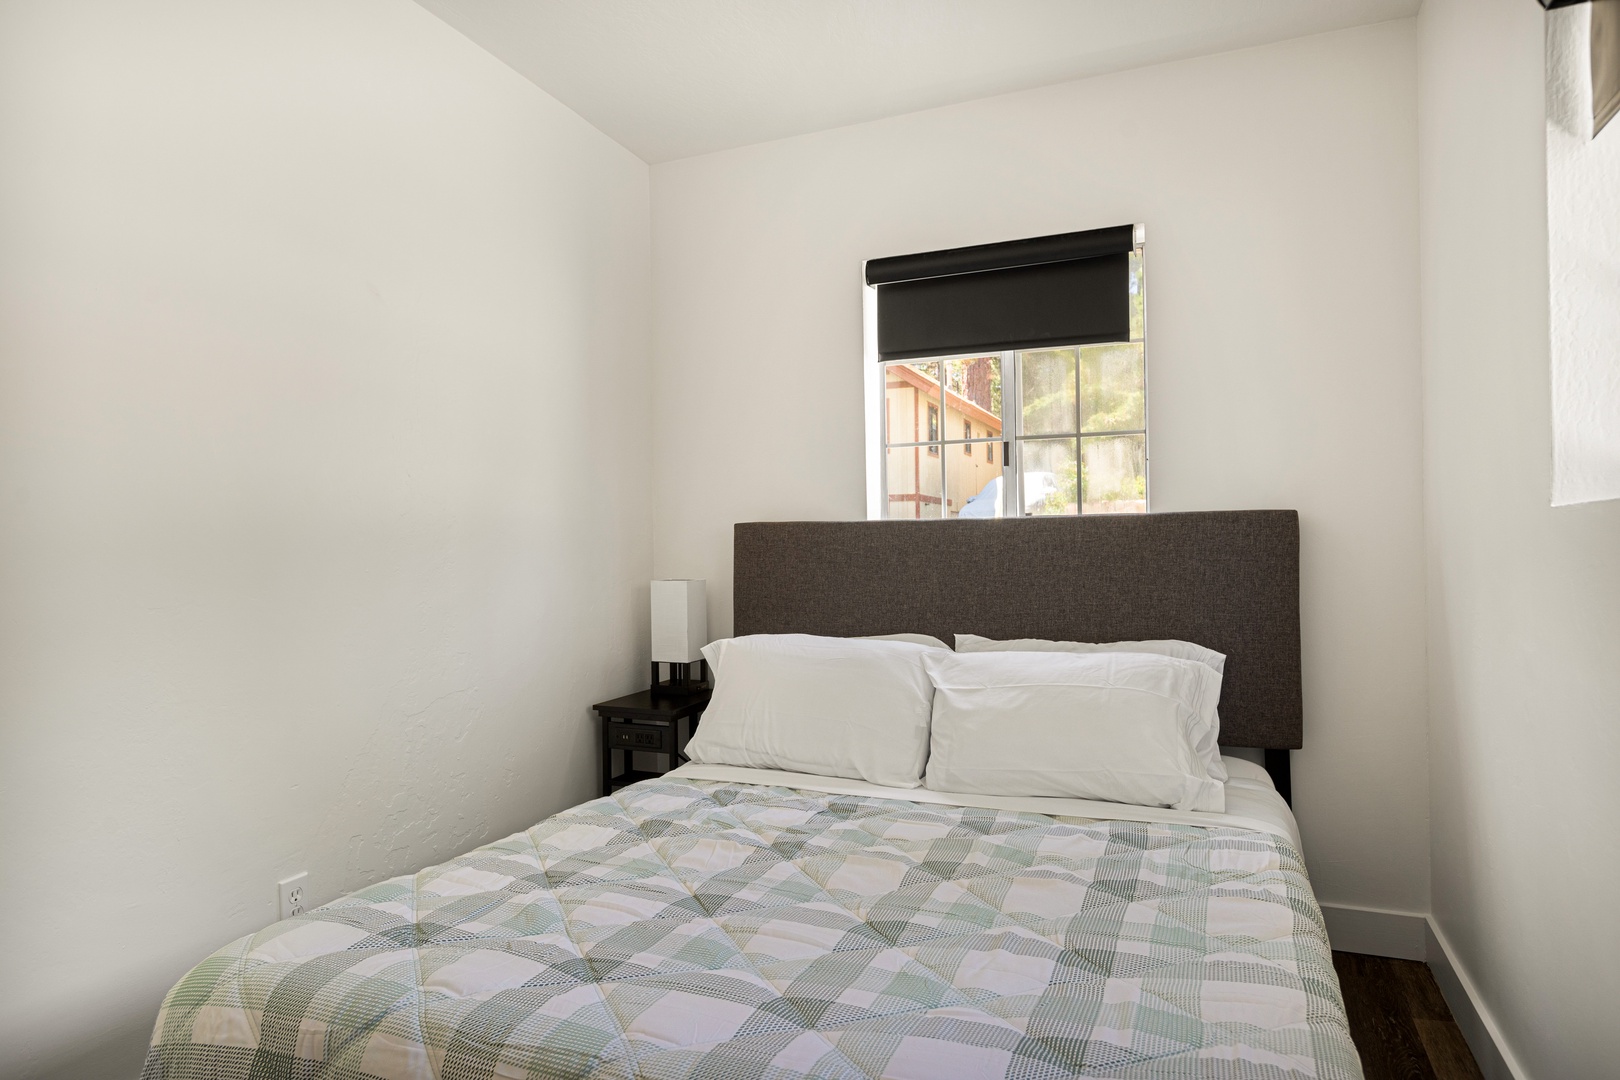 Unwind in the cozy bedroom with soft bedding and ample natural light